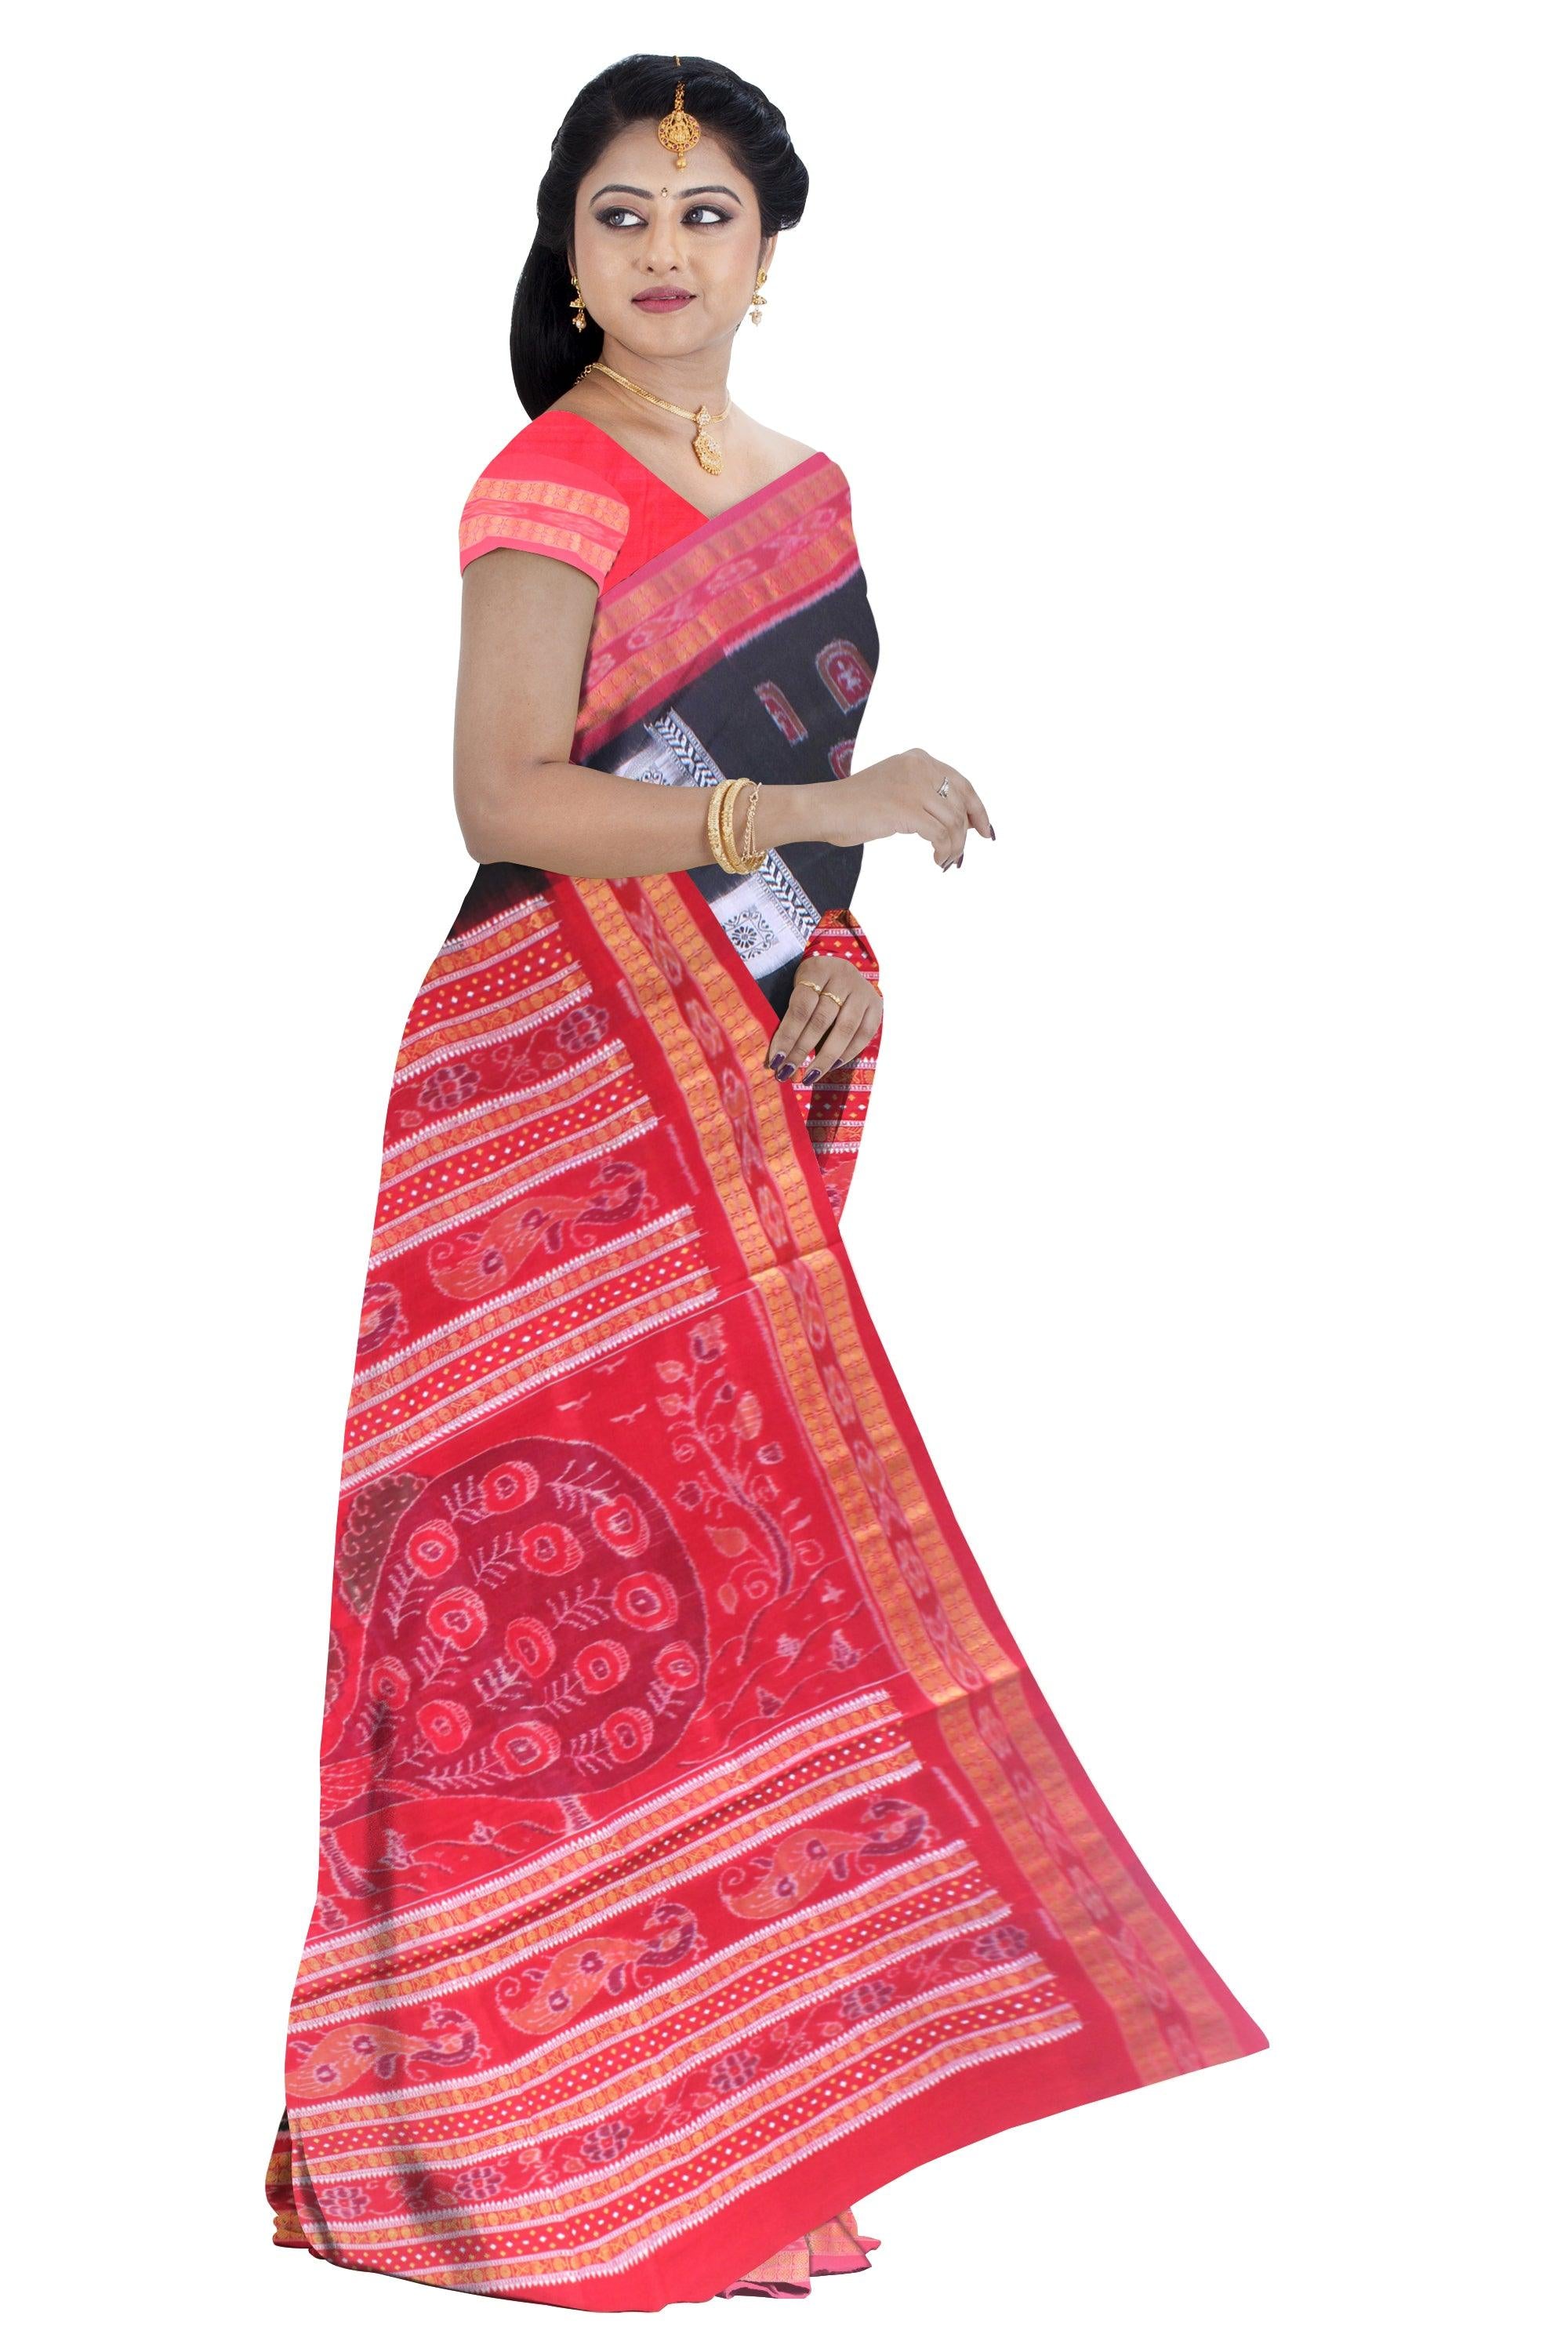 LATEST NEW PATTERN TERRACOTTA WITH TREE AND FLOWER BASED COTTON SAREE IN BLACK,WHITE AND RED AVAILABLE WITH BLOUSE . - Koshali Arts & Crafts Enterprise